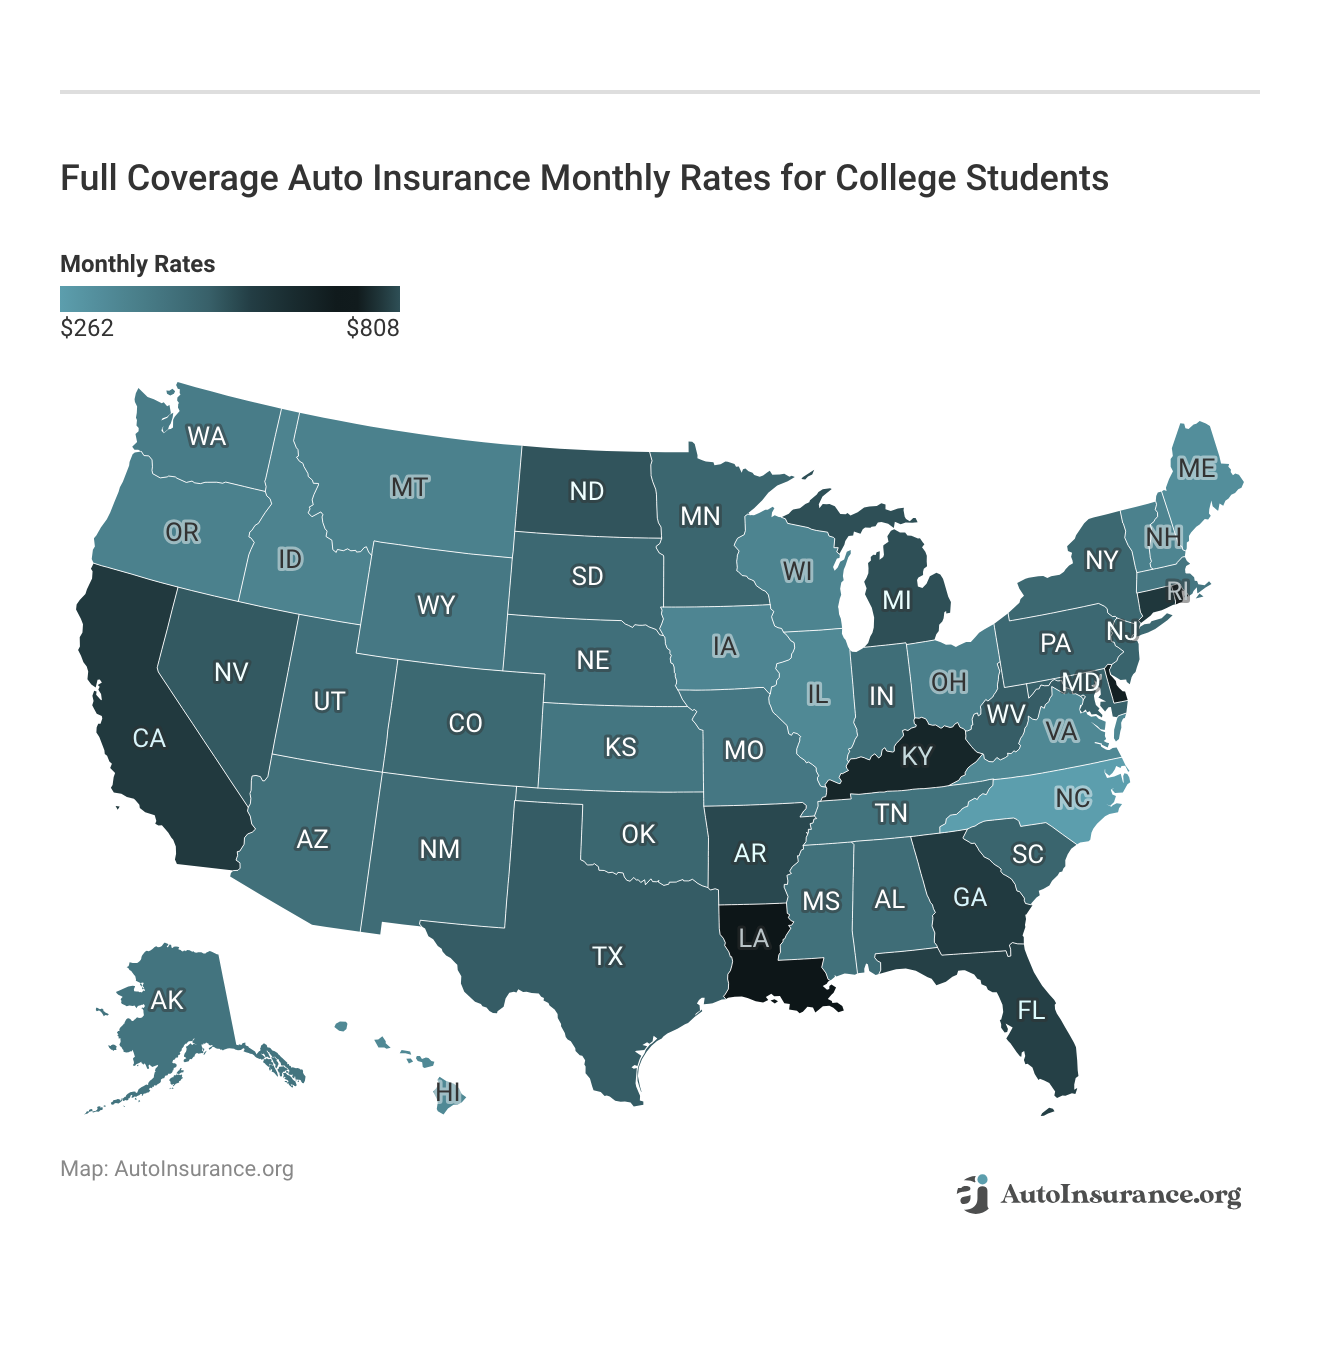 <h3>Full Coverage Auto Insurance Monthly Rates for College Students</h3>